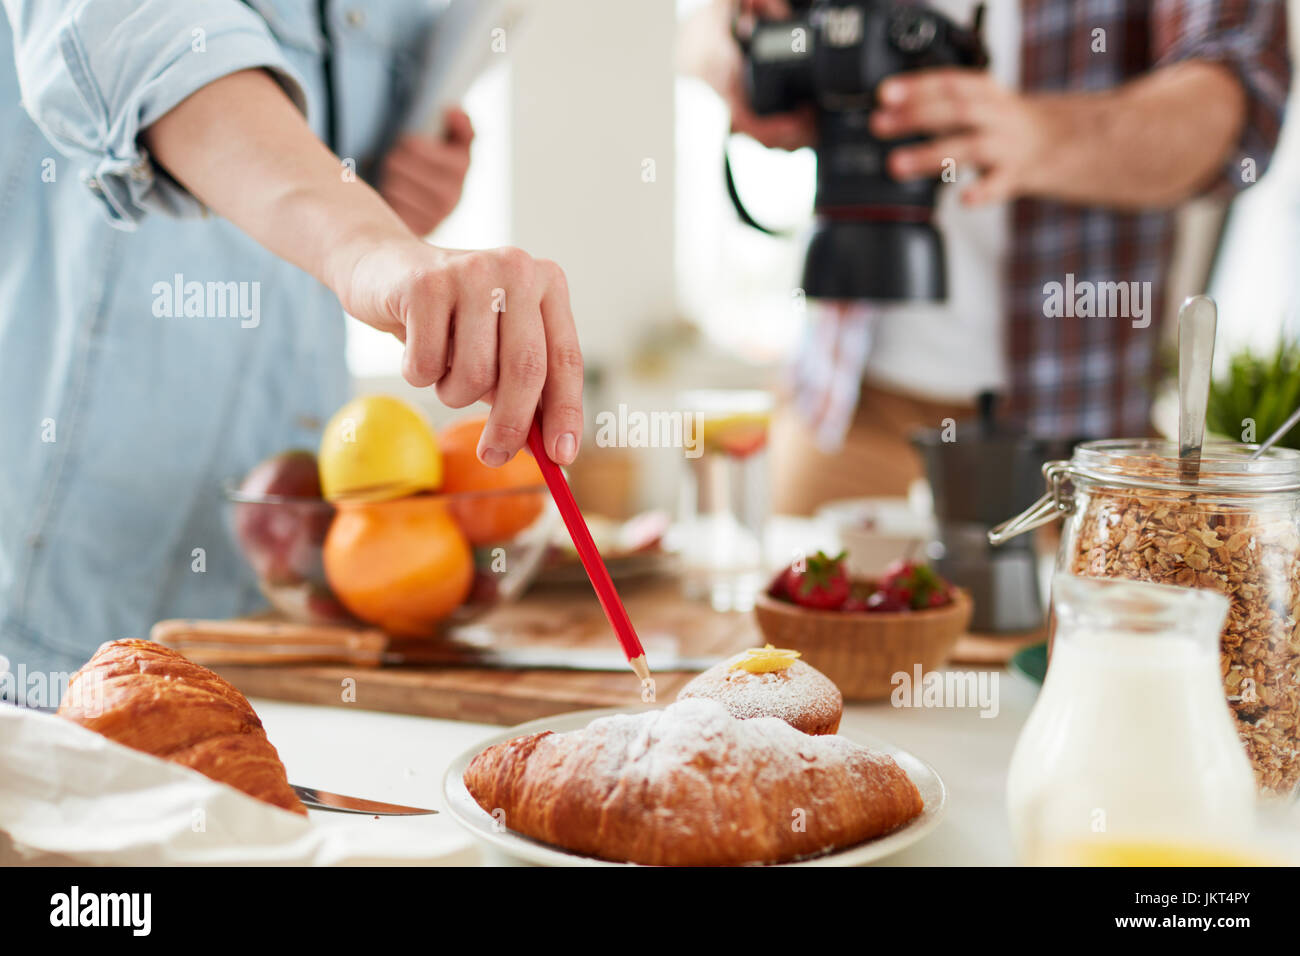 Food-stylist pointing at fresh croissant during working process Stock Photo